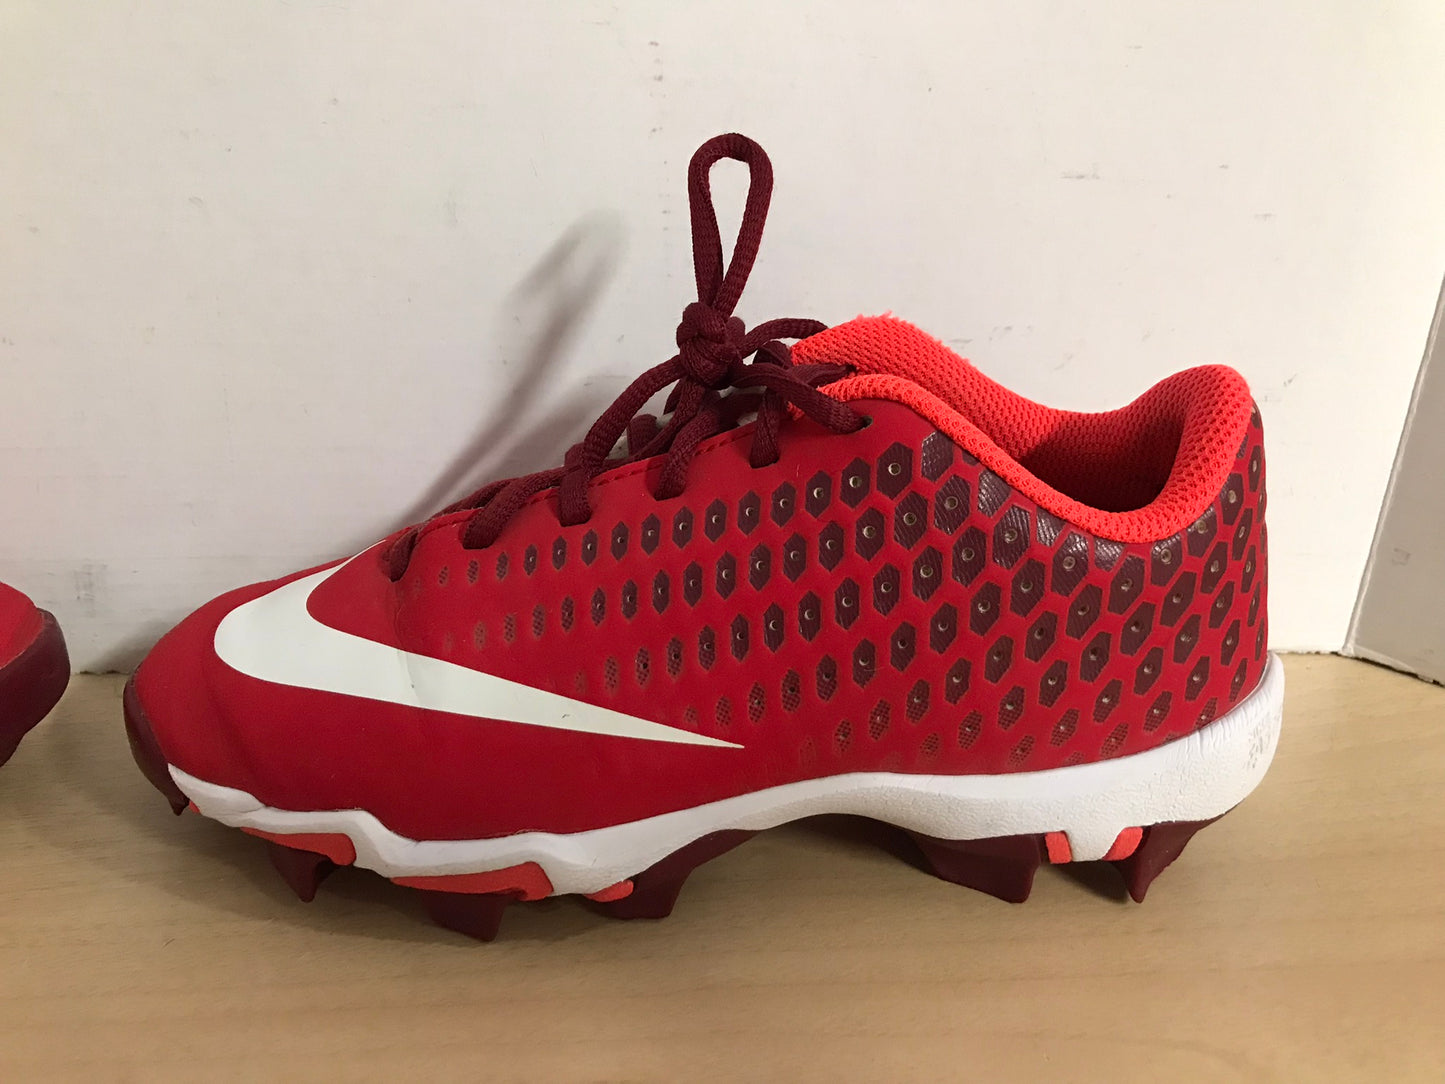 Baseball Shoes Cleats Child Size 2 Nike Red White Excellent